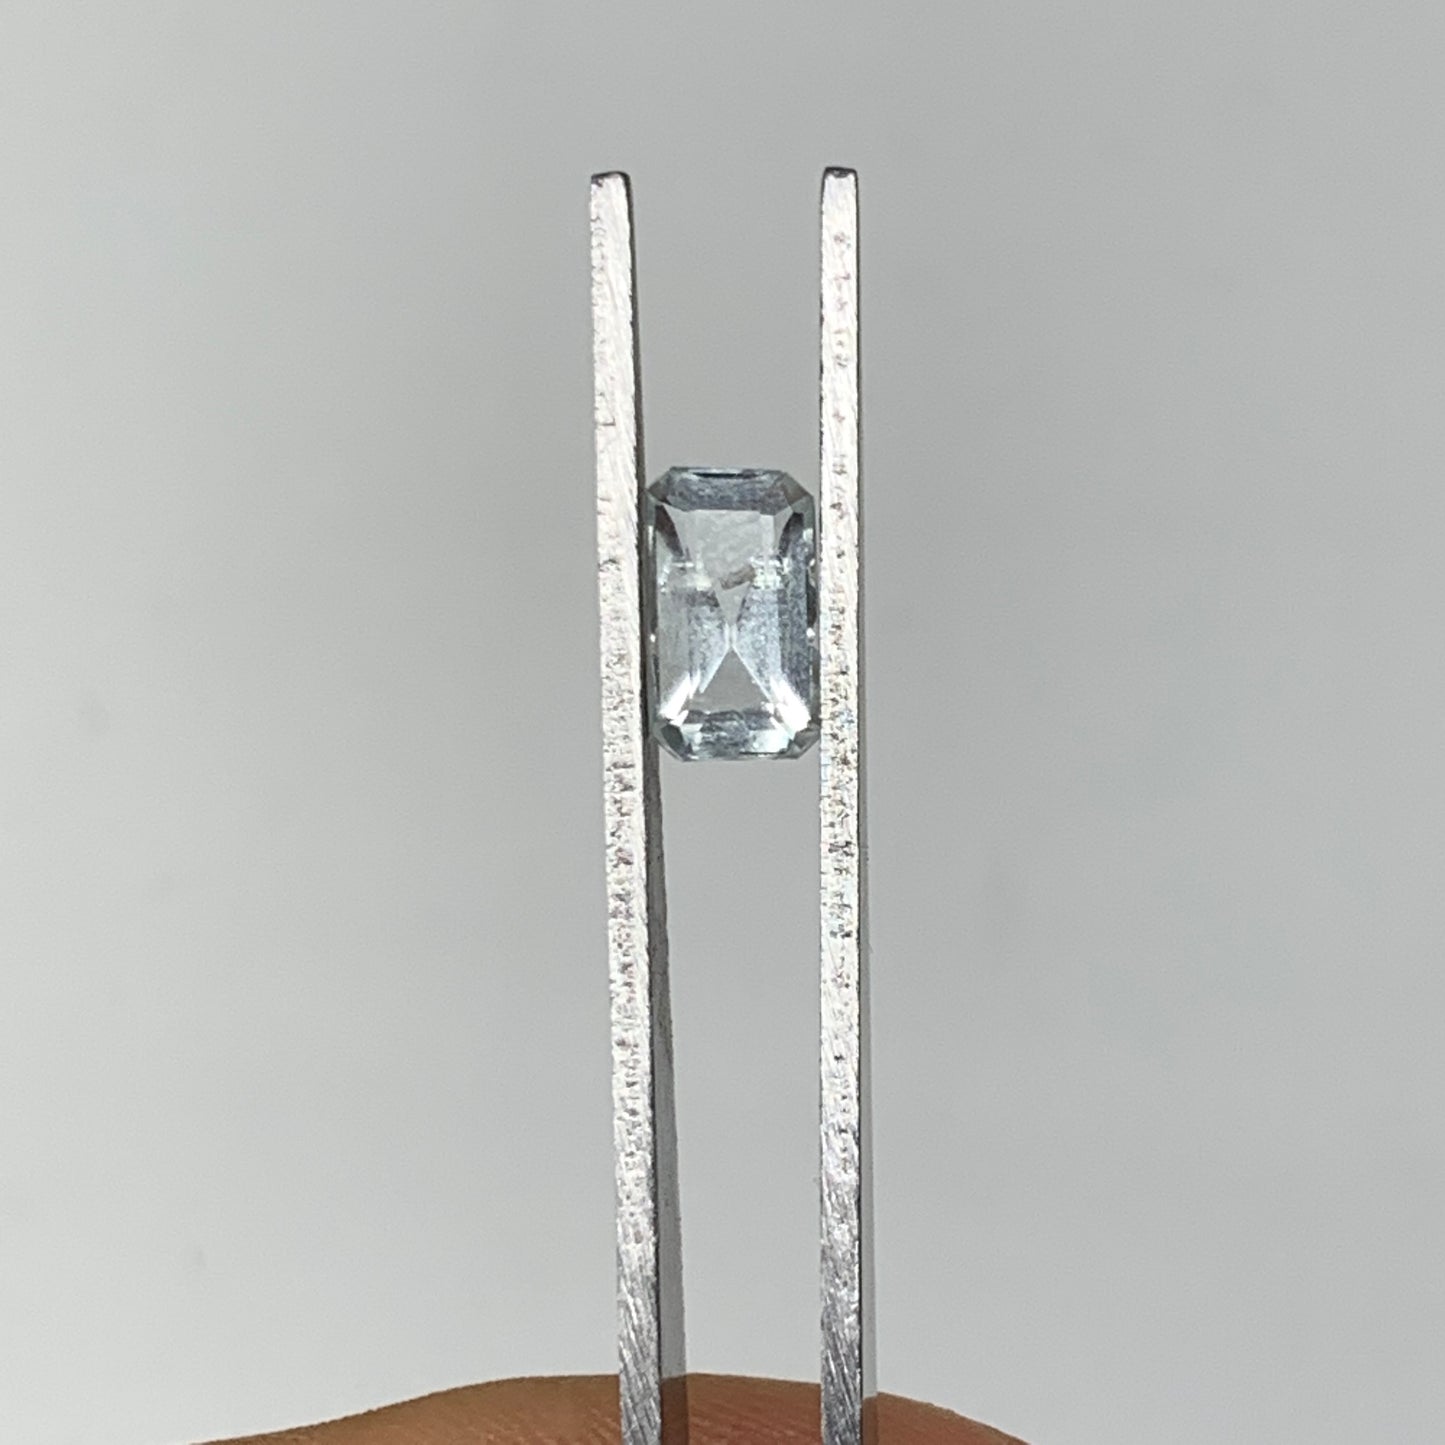 1.64cts, 9mmx5mmx4mm, Aquamarine Crystal Facetted Stone Loose @Pakistan,CTS154